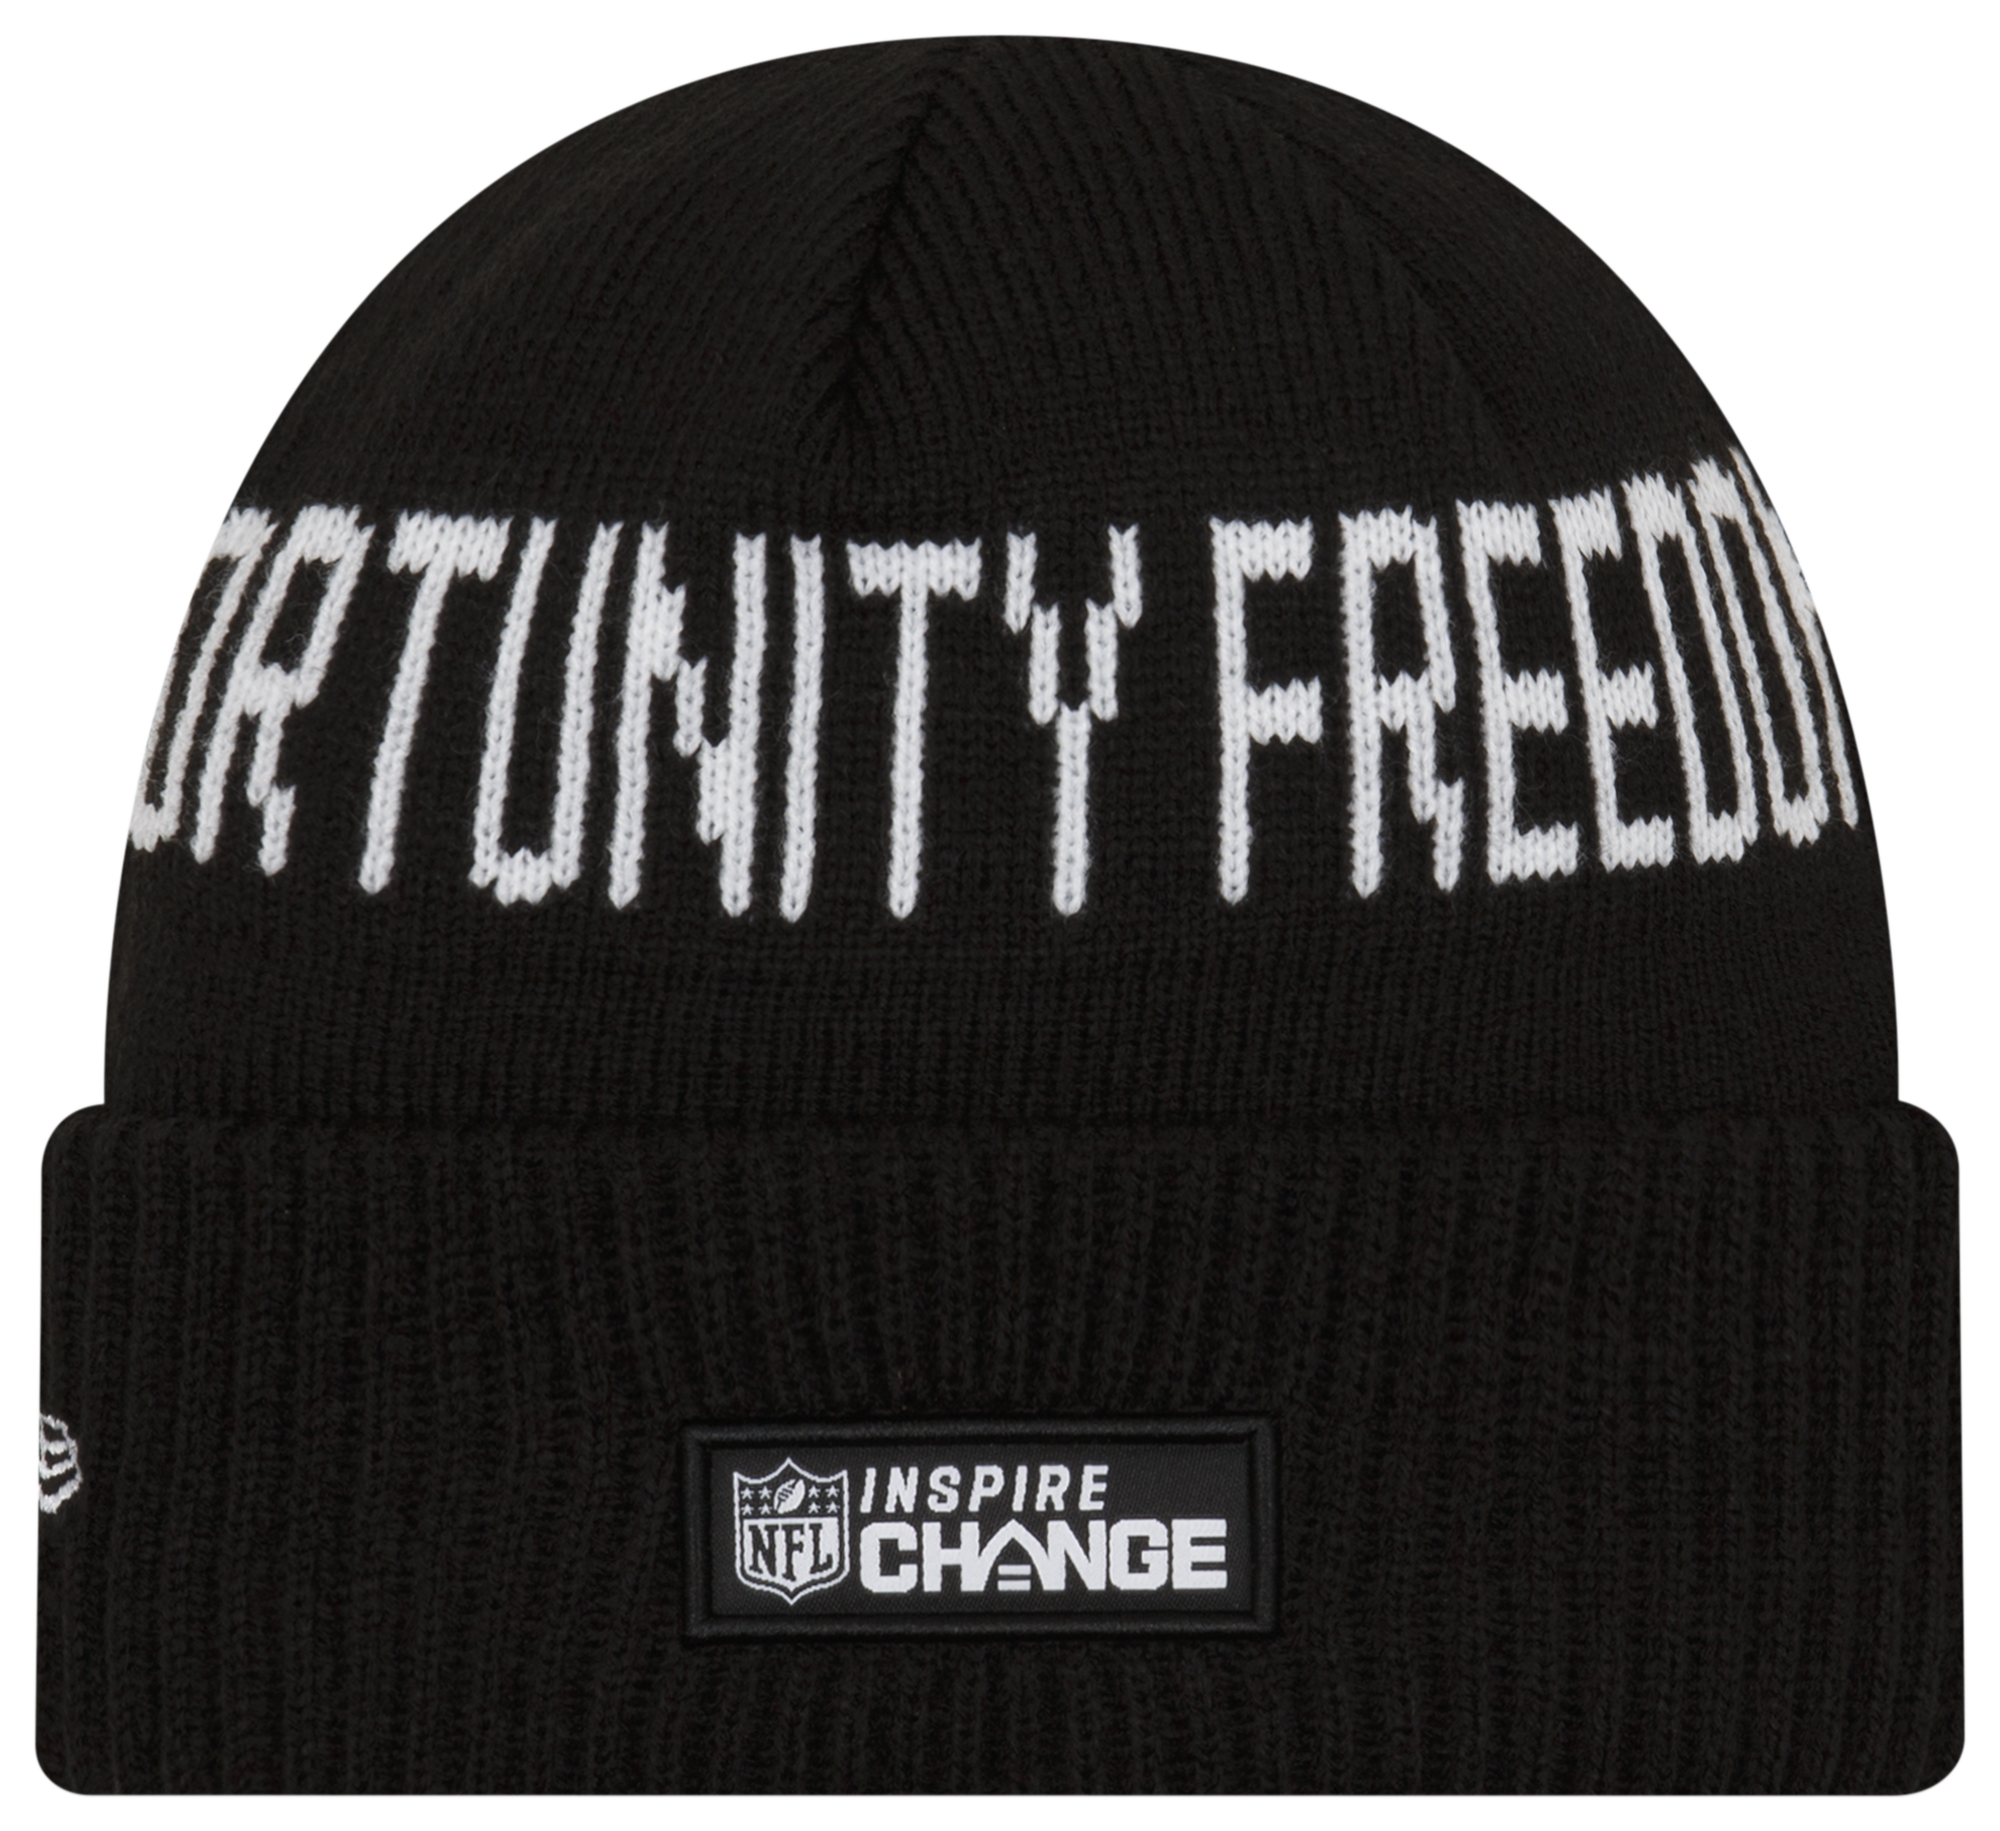 New Era Browns Social Justice Knit Beanie